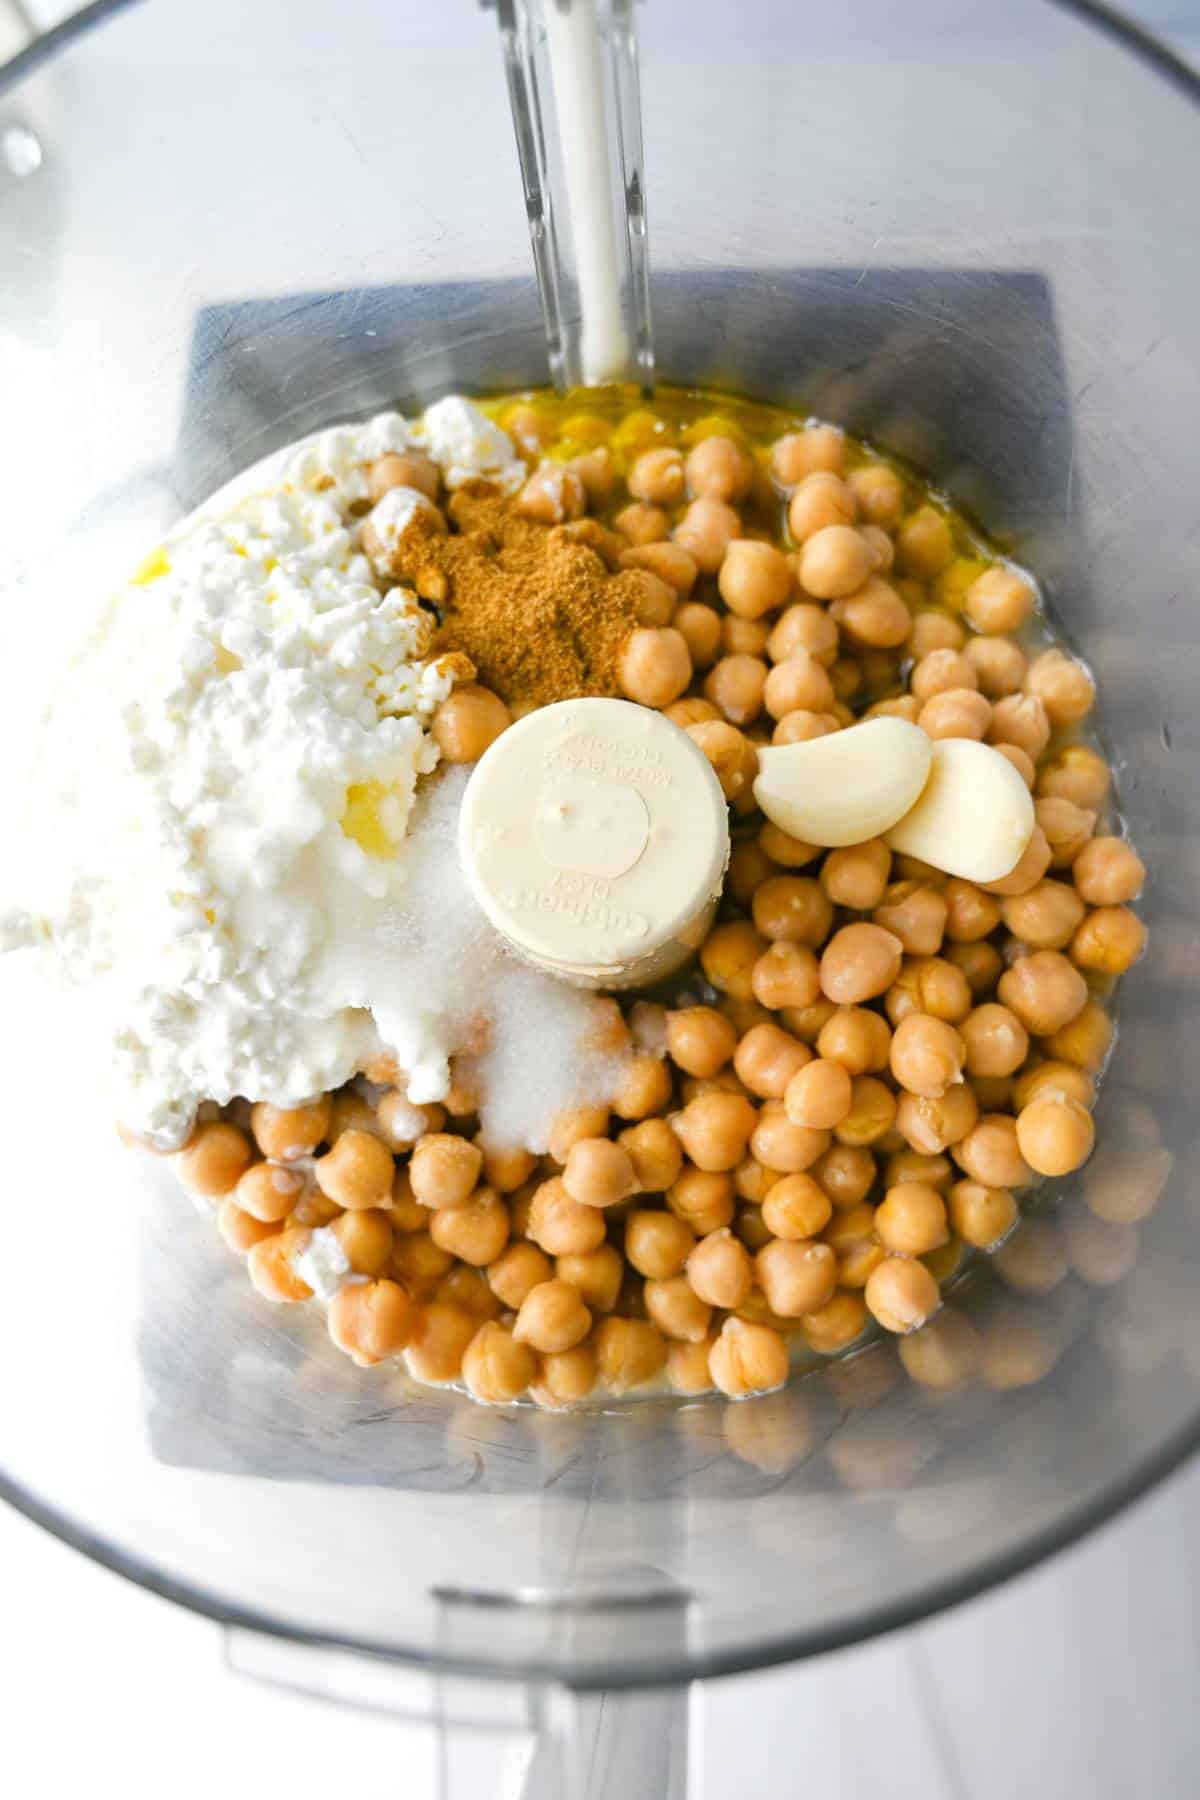 all the ingredients for protein hummus in a food processor ready to blend